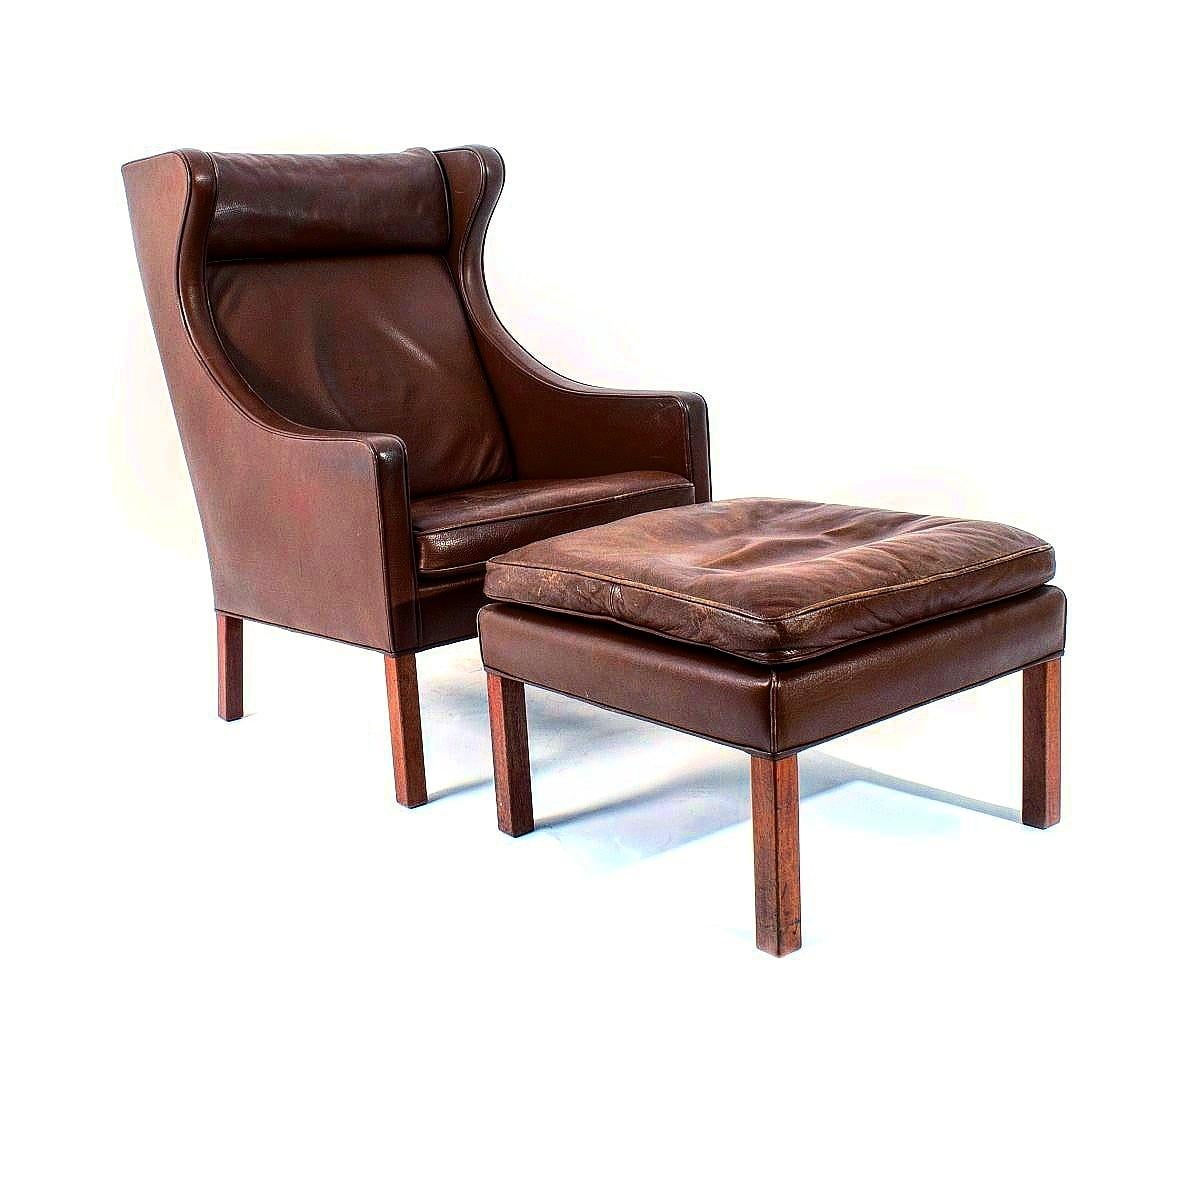 Borge Mogensen brown leather wingback lounge or easy chair; model 2204, and ottoman model 2202. Produced by Fredericia Stolefabrik in Denmark.

He was one of the most important among a generation of furniture designers who made the concept of